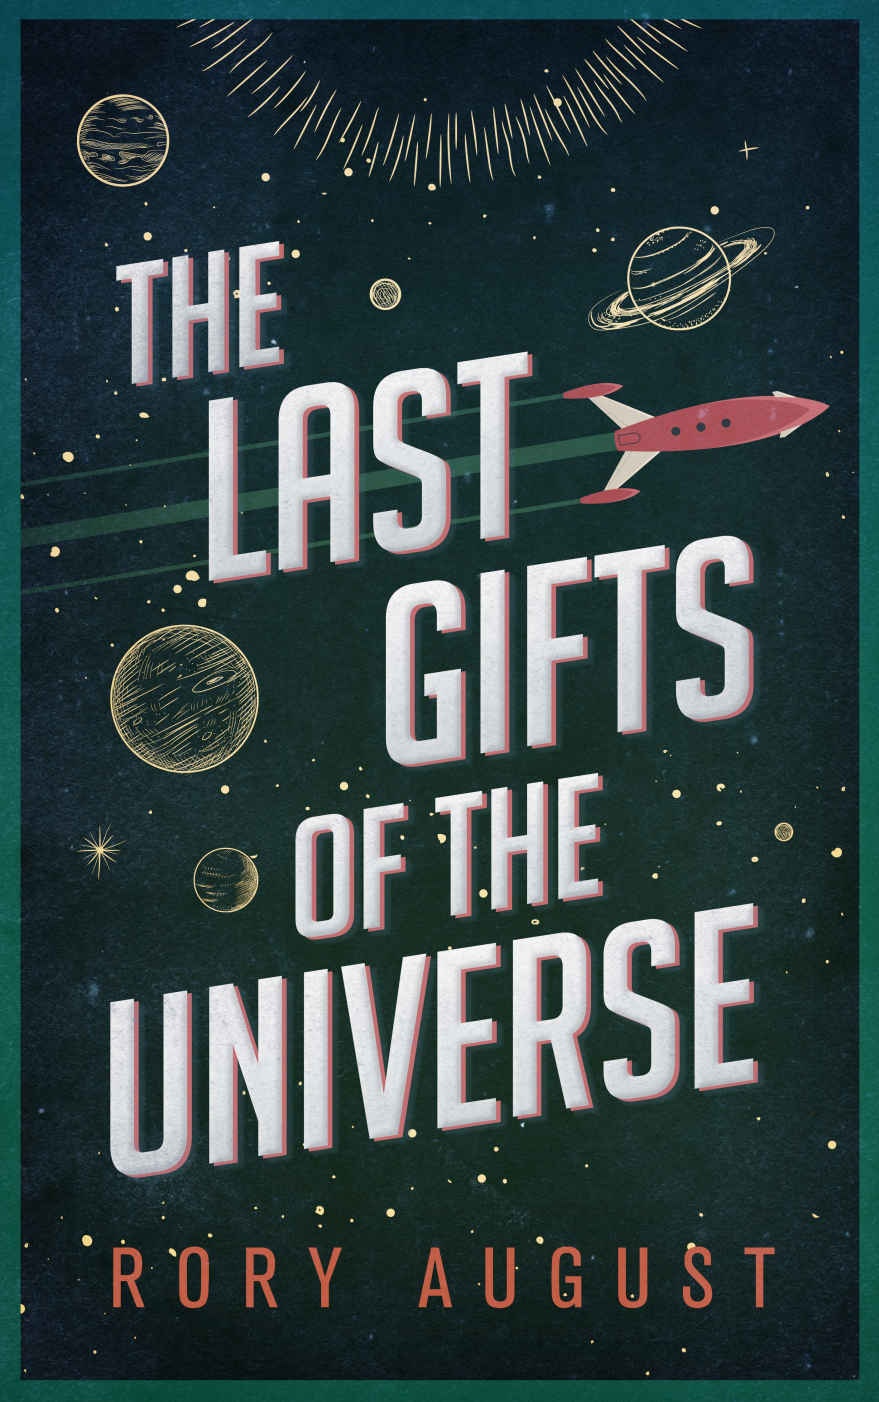 Rory August: The Last Gifts of the Universe (Paperback, 2022, Rory August)